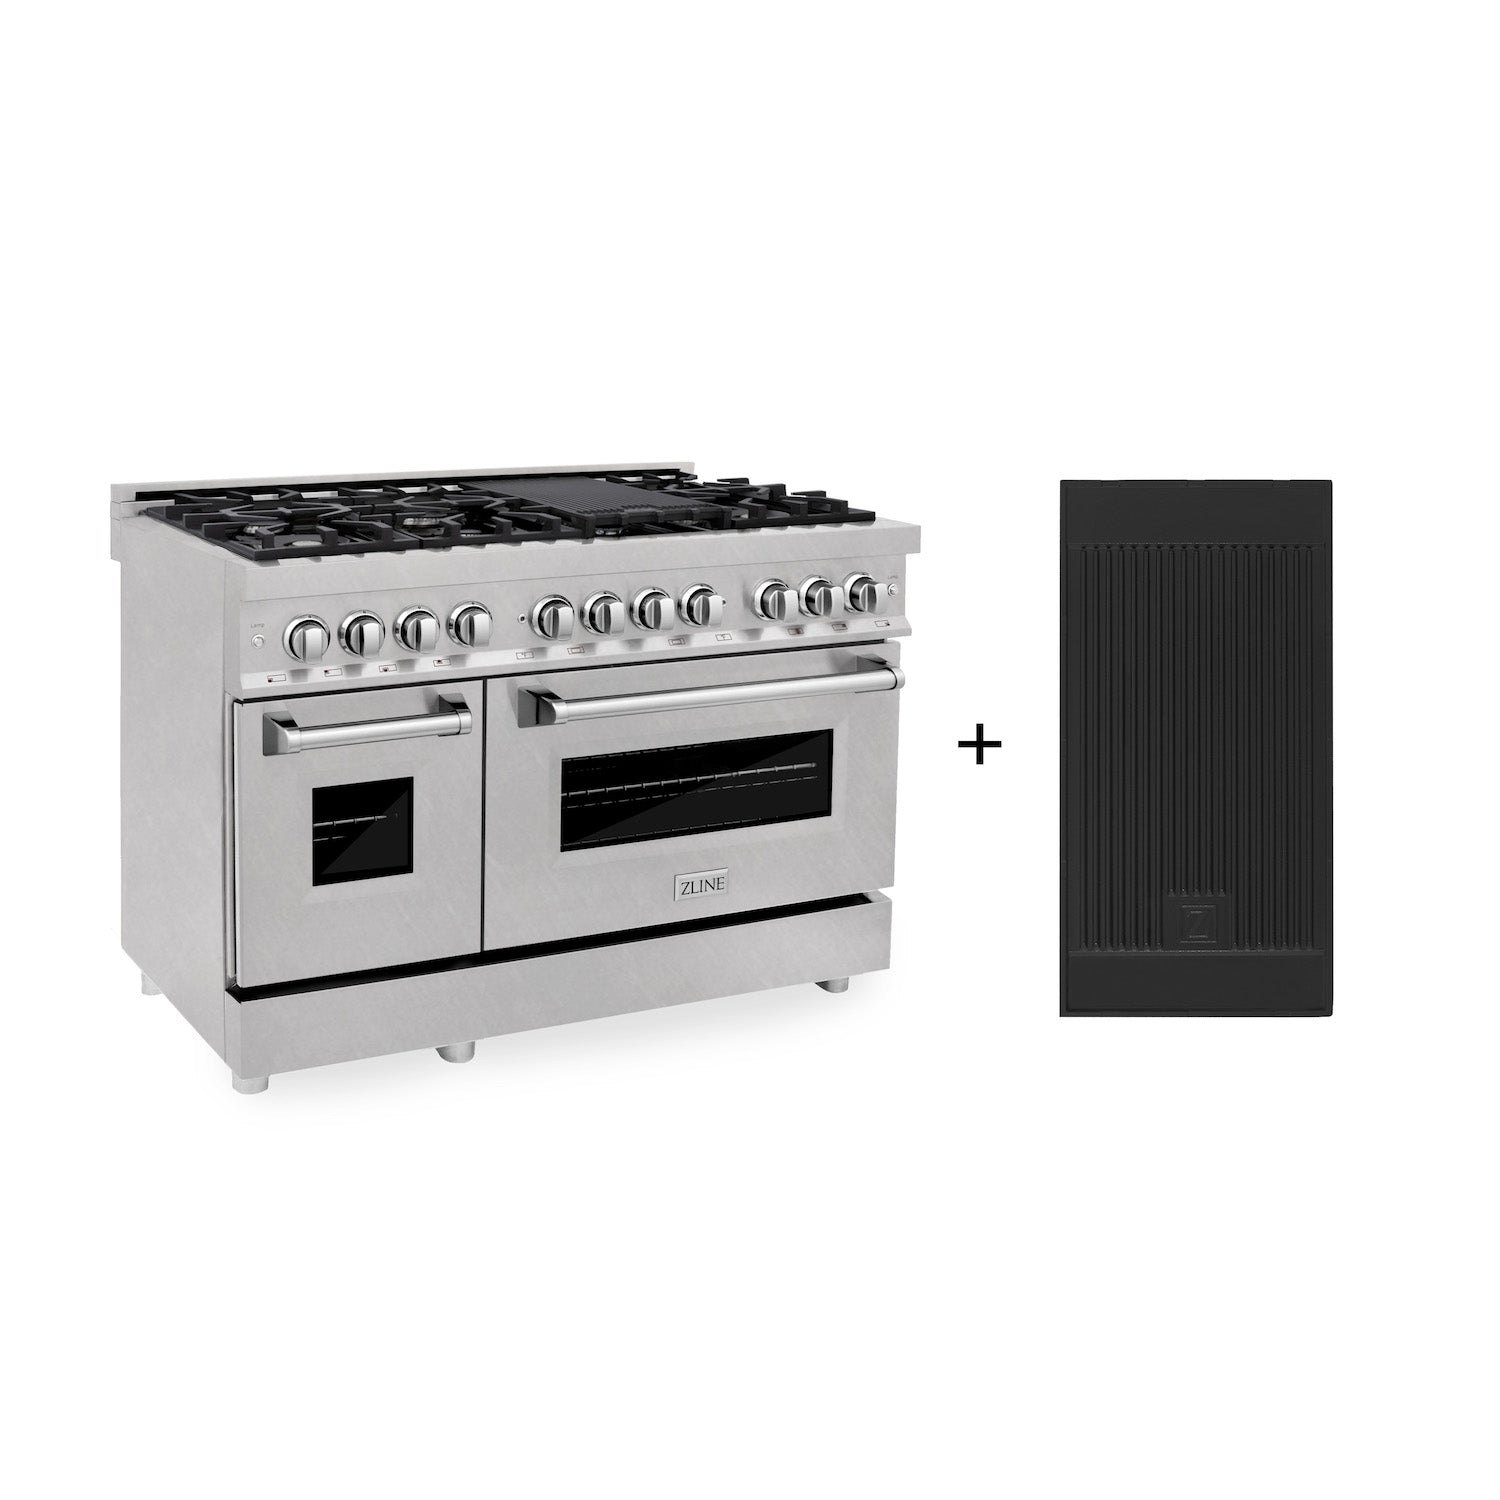 ZLINE 48" 6.0 cu. ft. Electric Oven and Gas Cooktop Dual Fuel Range with Griddle in Fingerprint Resistant Stainless (RAS-SN-GR-48)